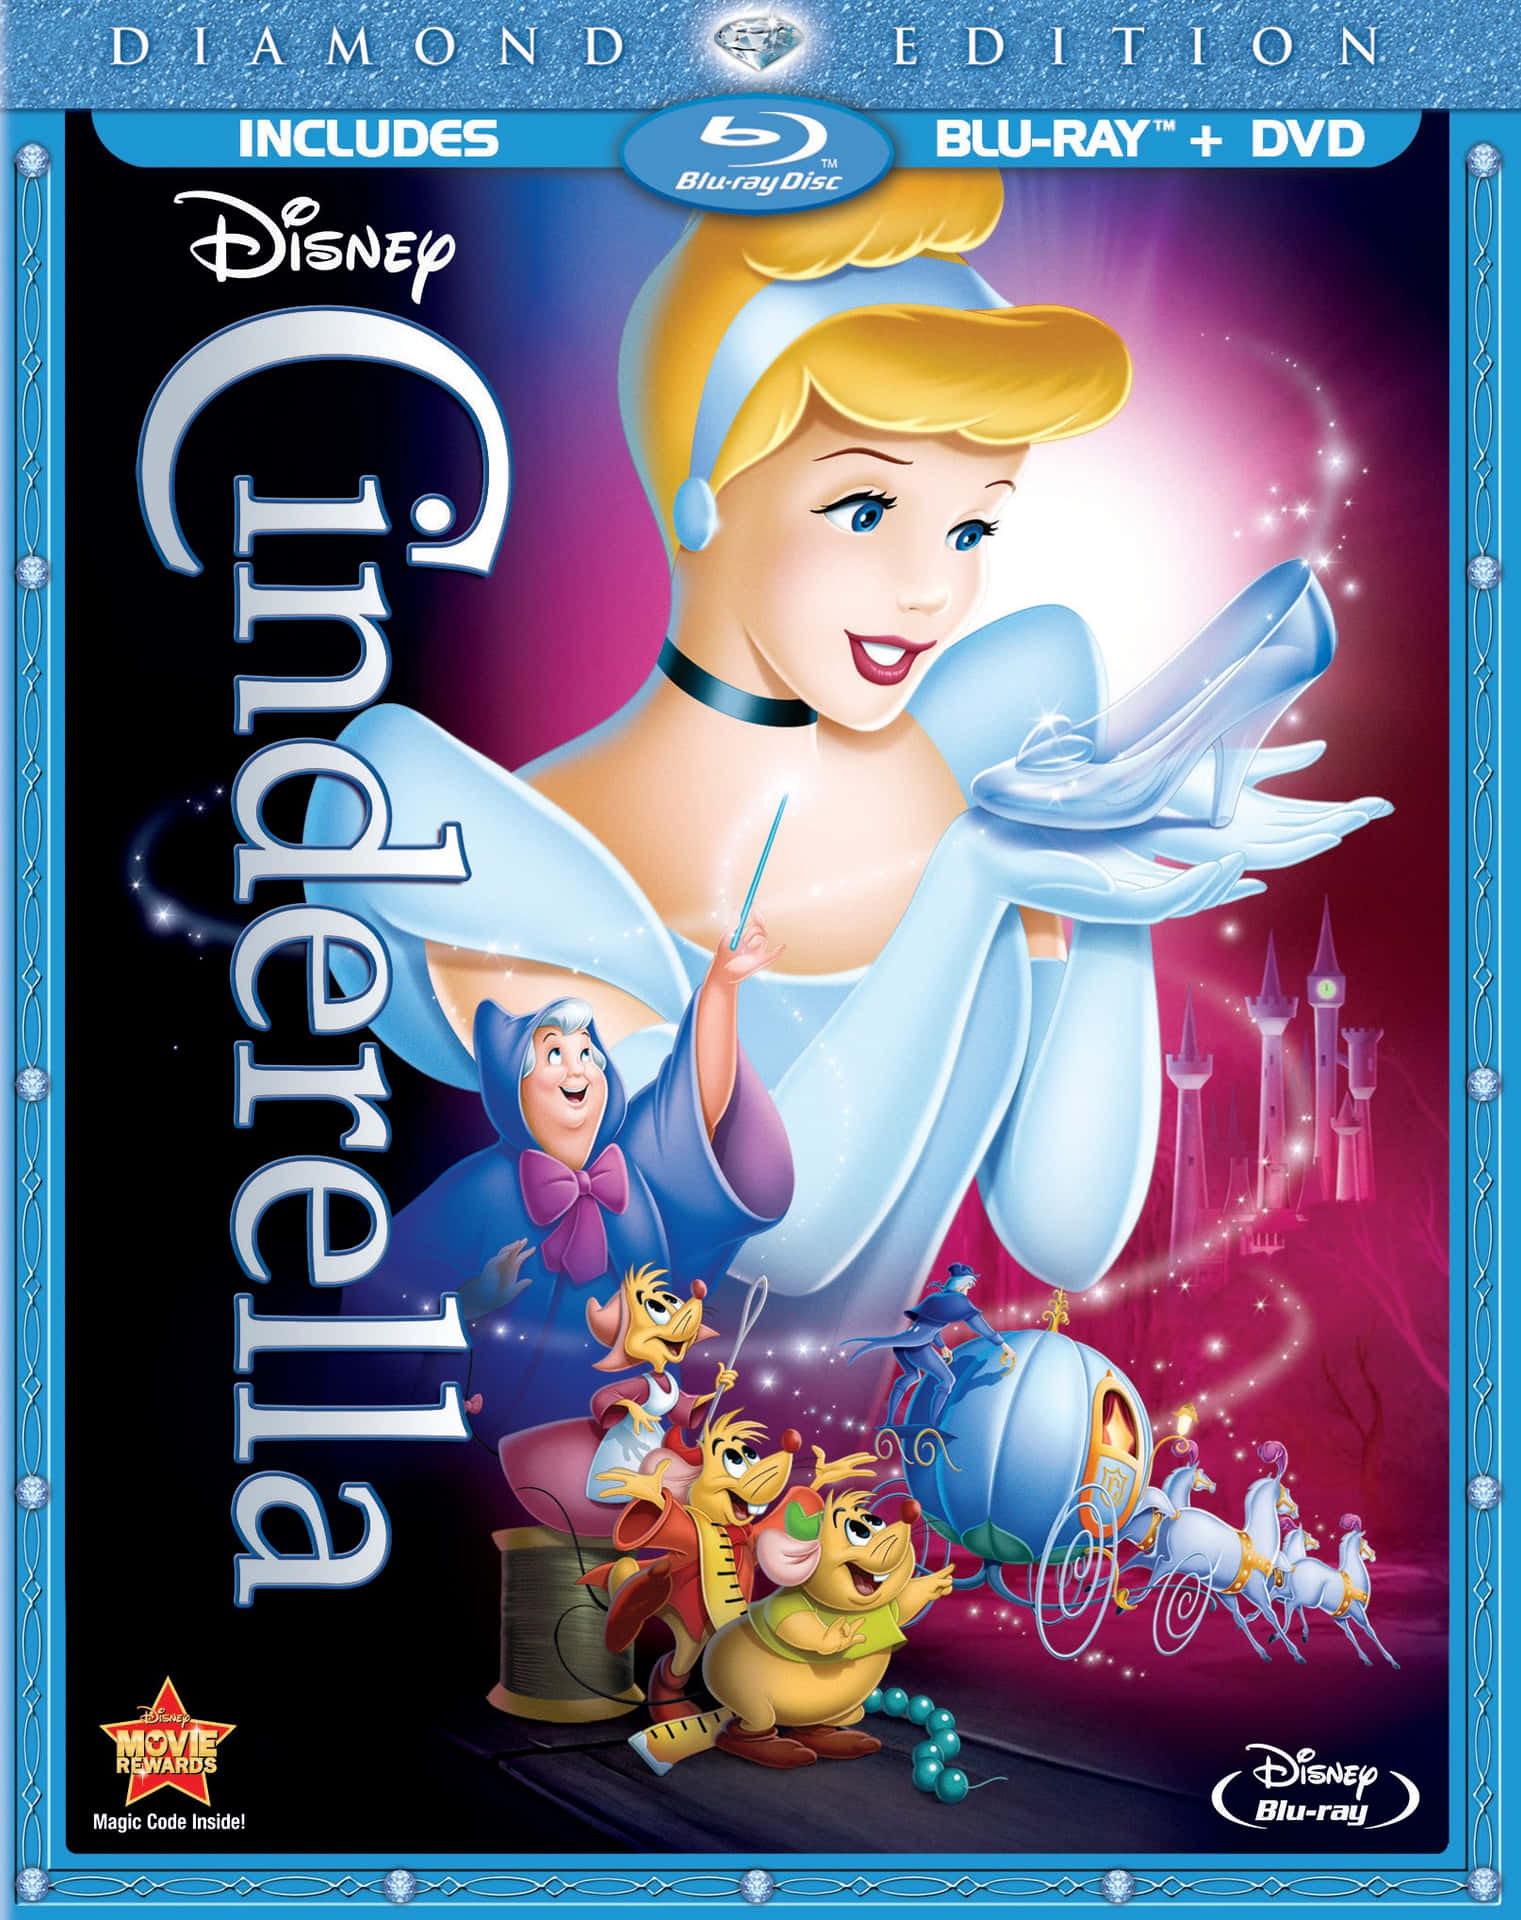 "A classic fairy tale come to life with the beautiful Cinderella"